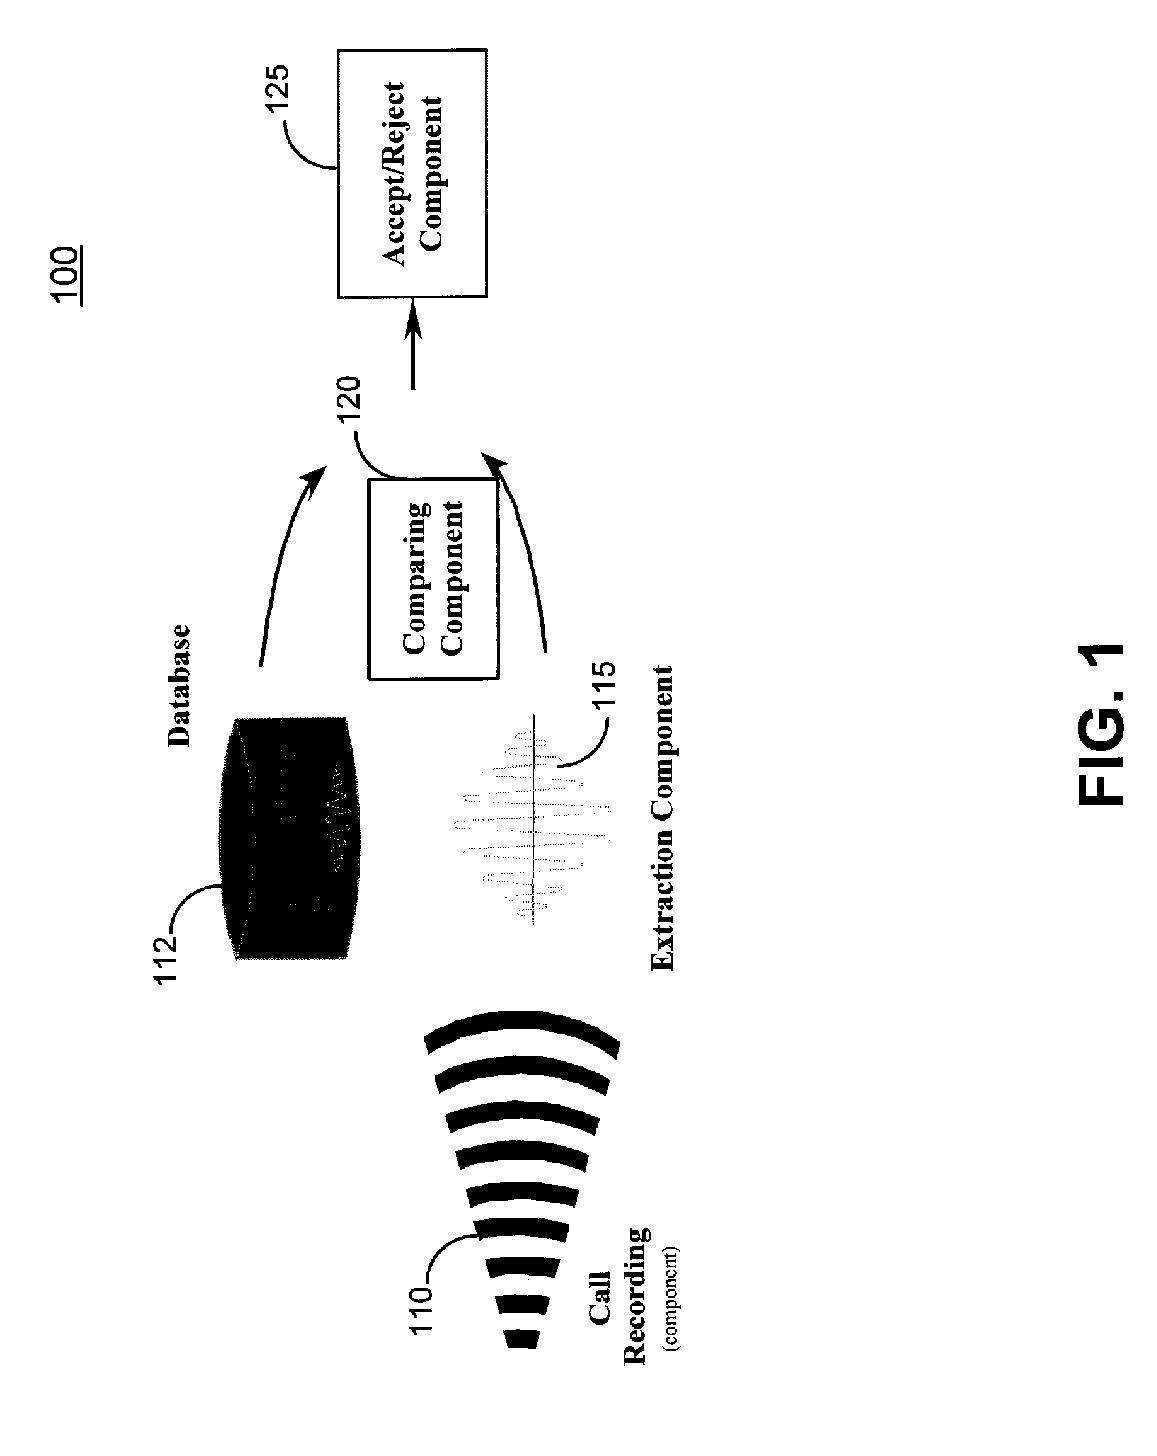 Word recognition system and method for customer and employee assessment